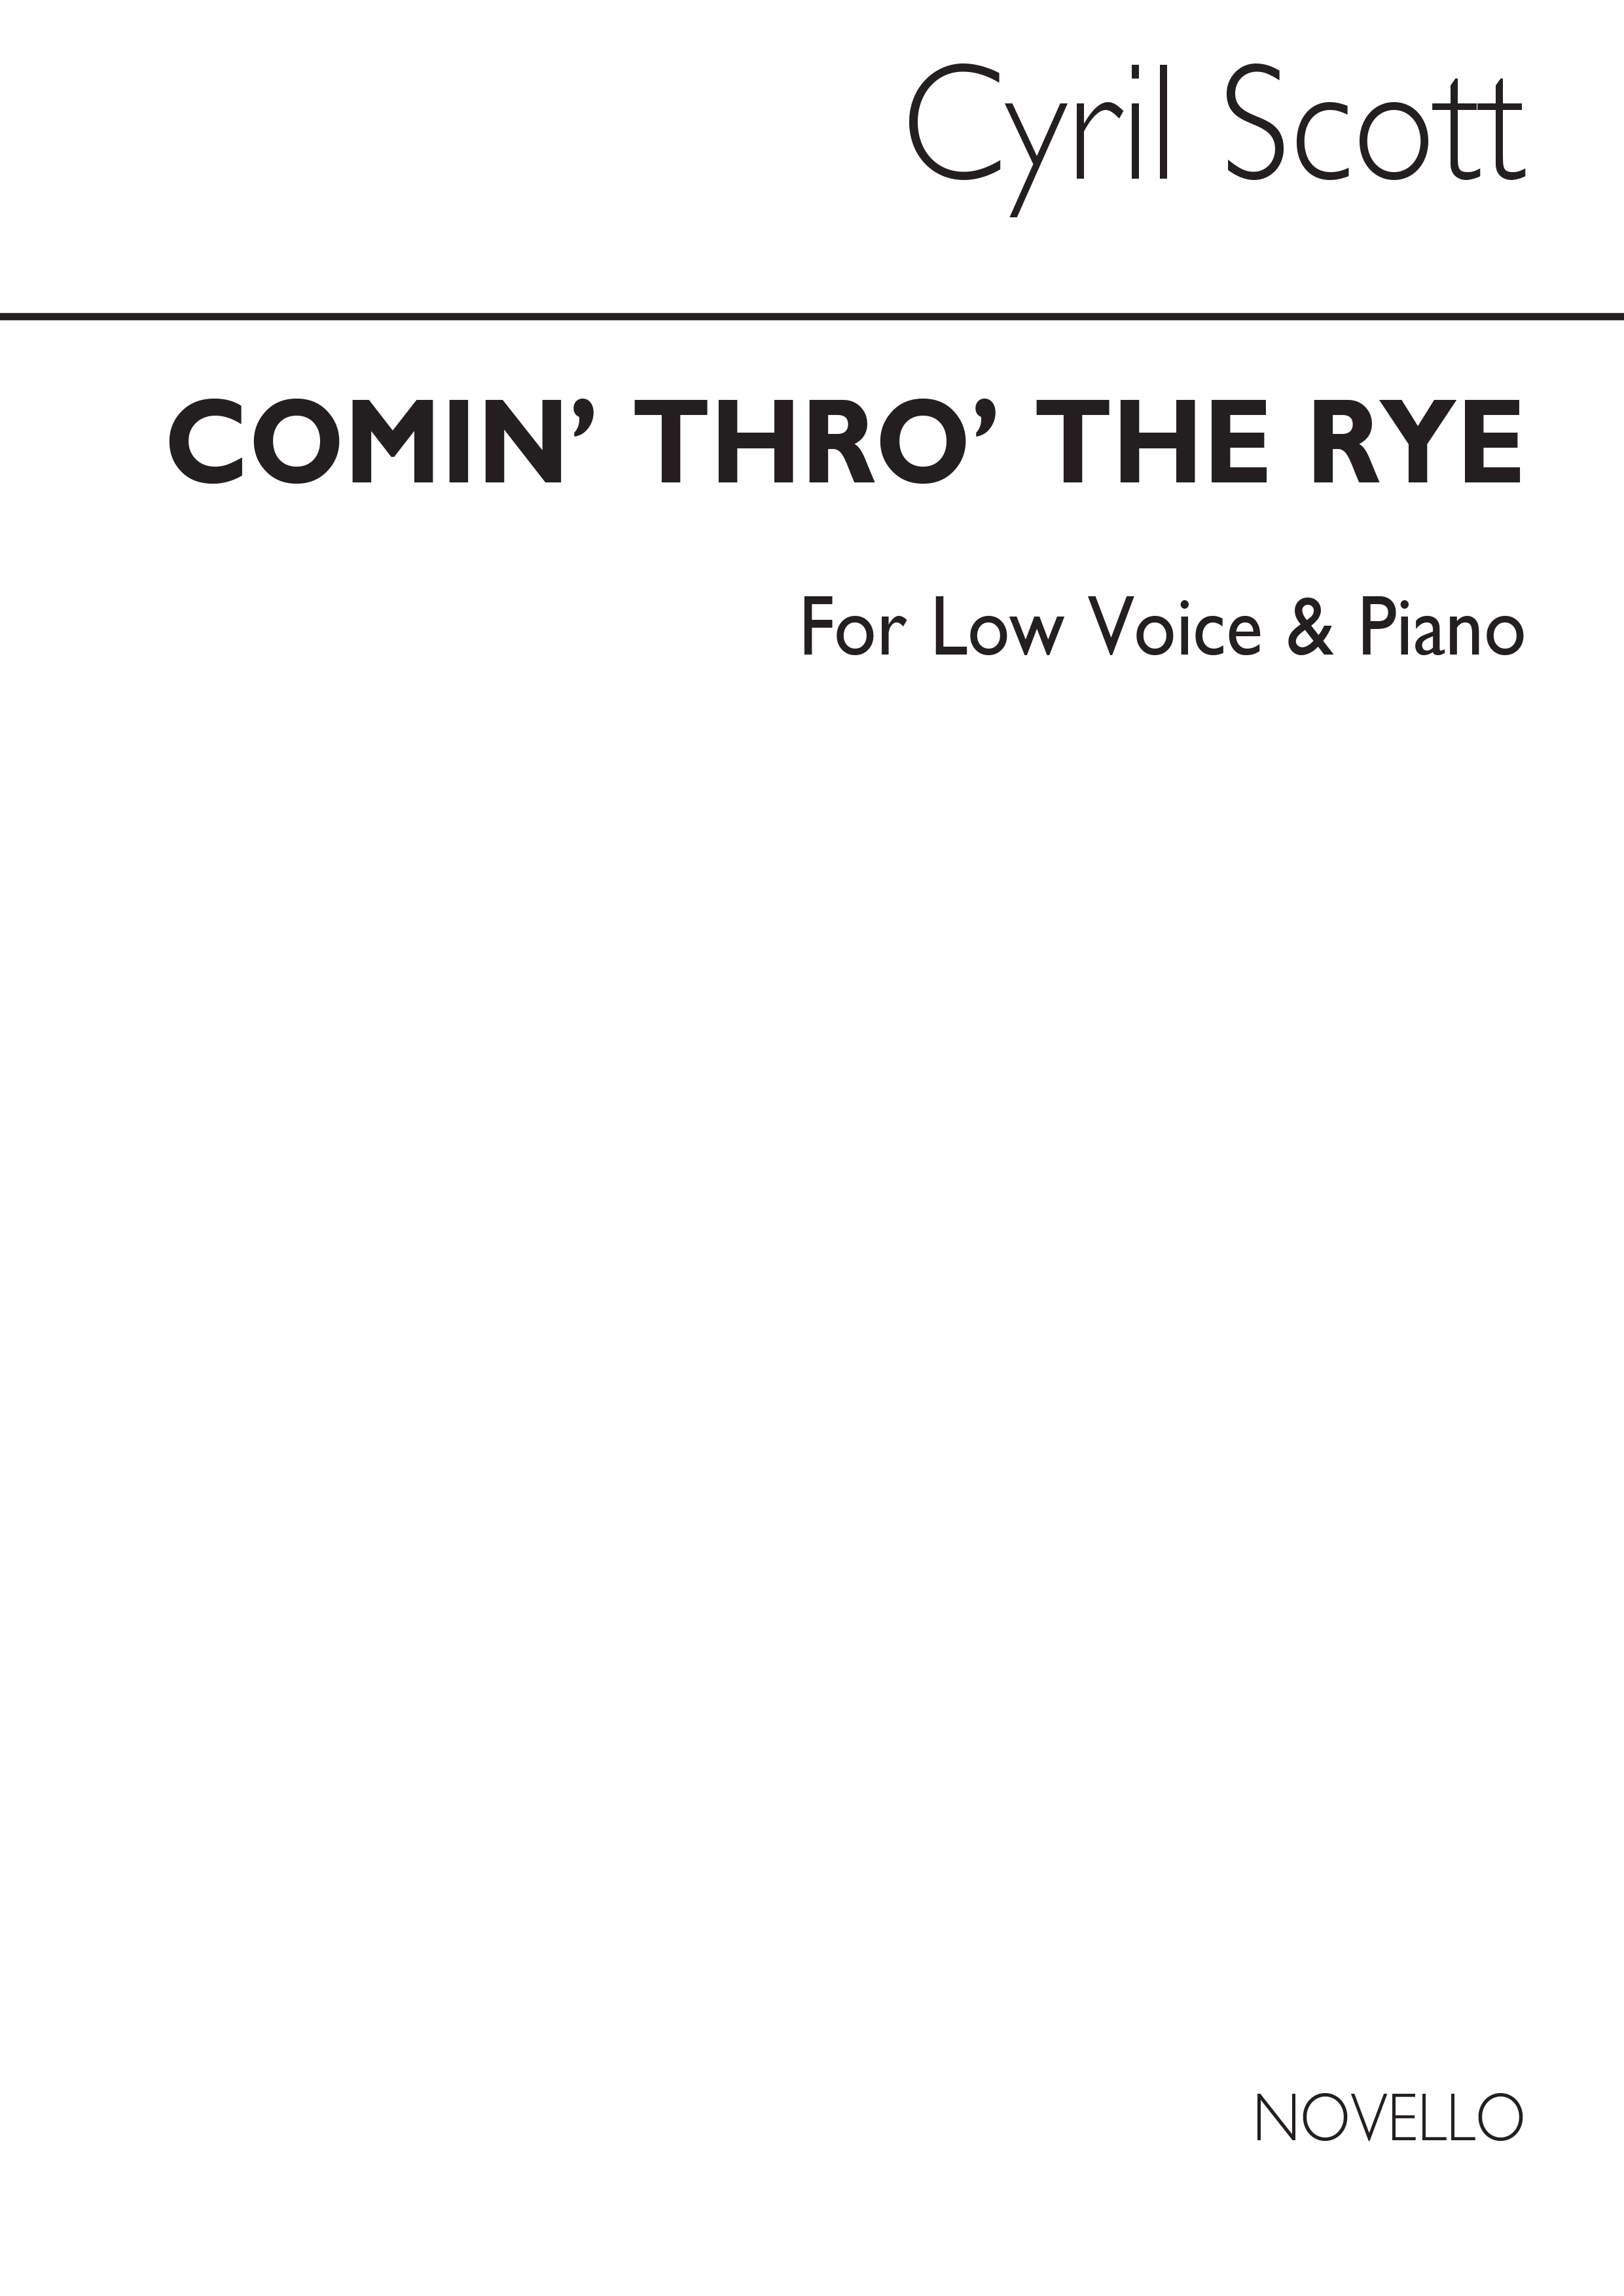 Cyril Scott: Comin' Thro' The Rye-low Voice/Piano (Key-g): Low Voice: Vocal Work